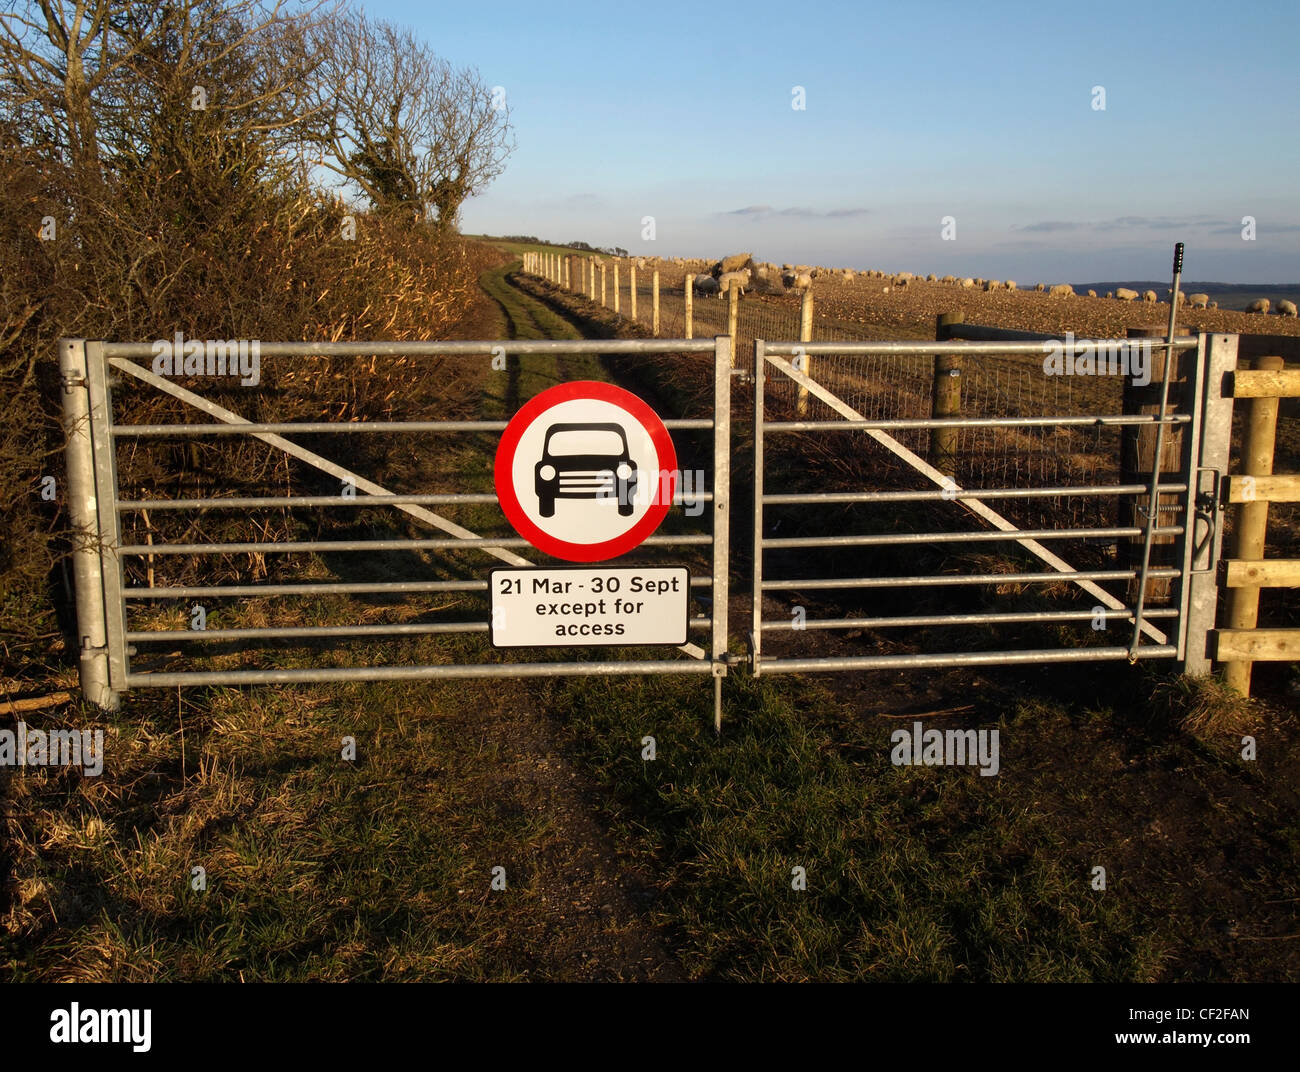 Byway restricted access sign, Purbeck hills, Dorset, England Stock Photo